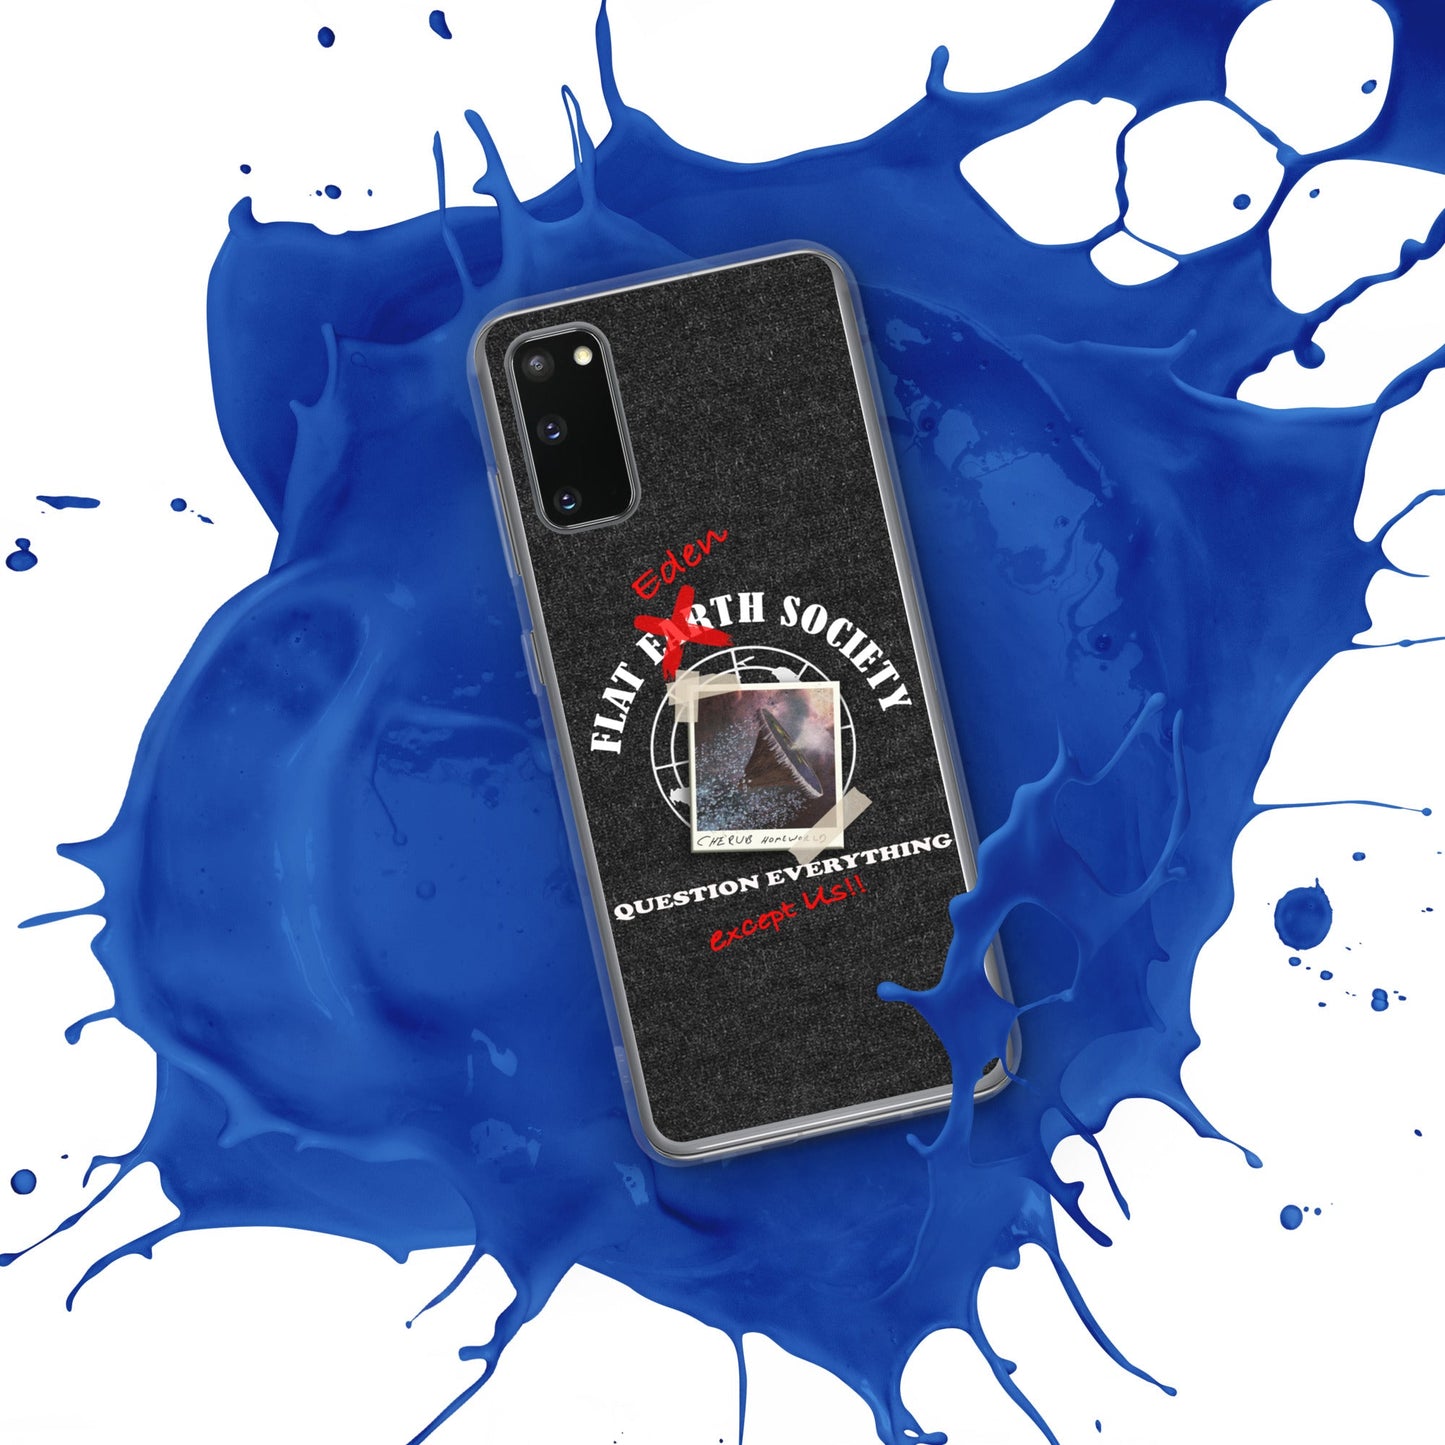 Samsung | Intergalactic Space Force 2 | Flat Eden Society - Spectral Ink Shop - Mobile Phone Cases -7213222_11347